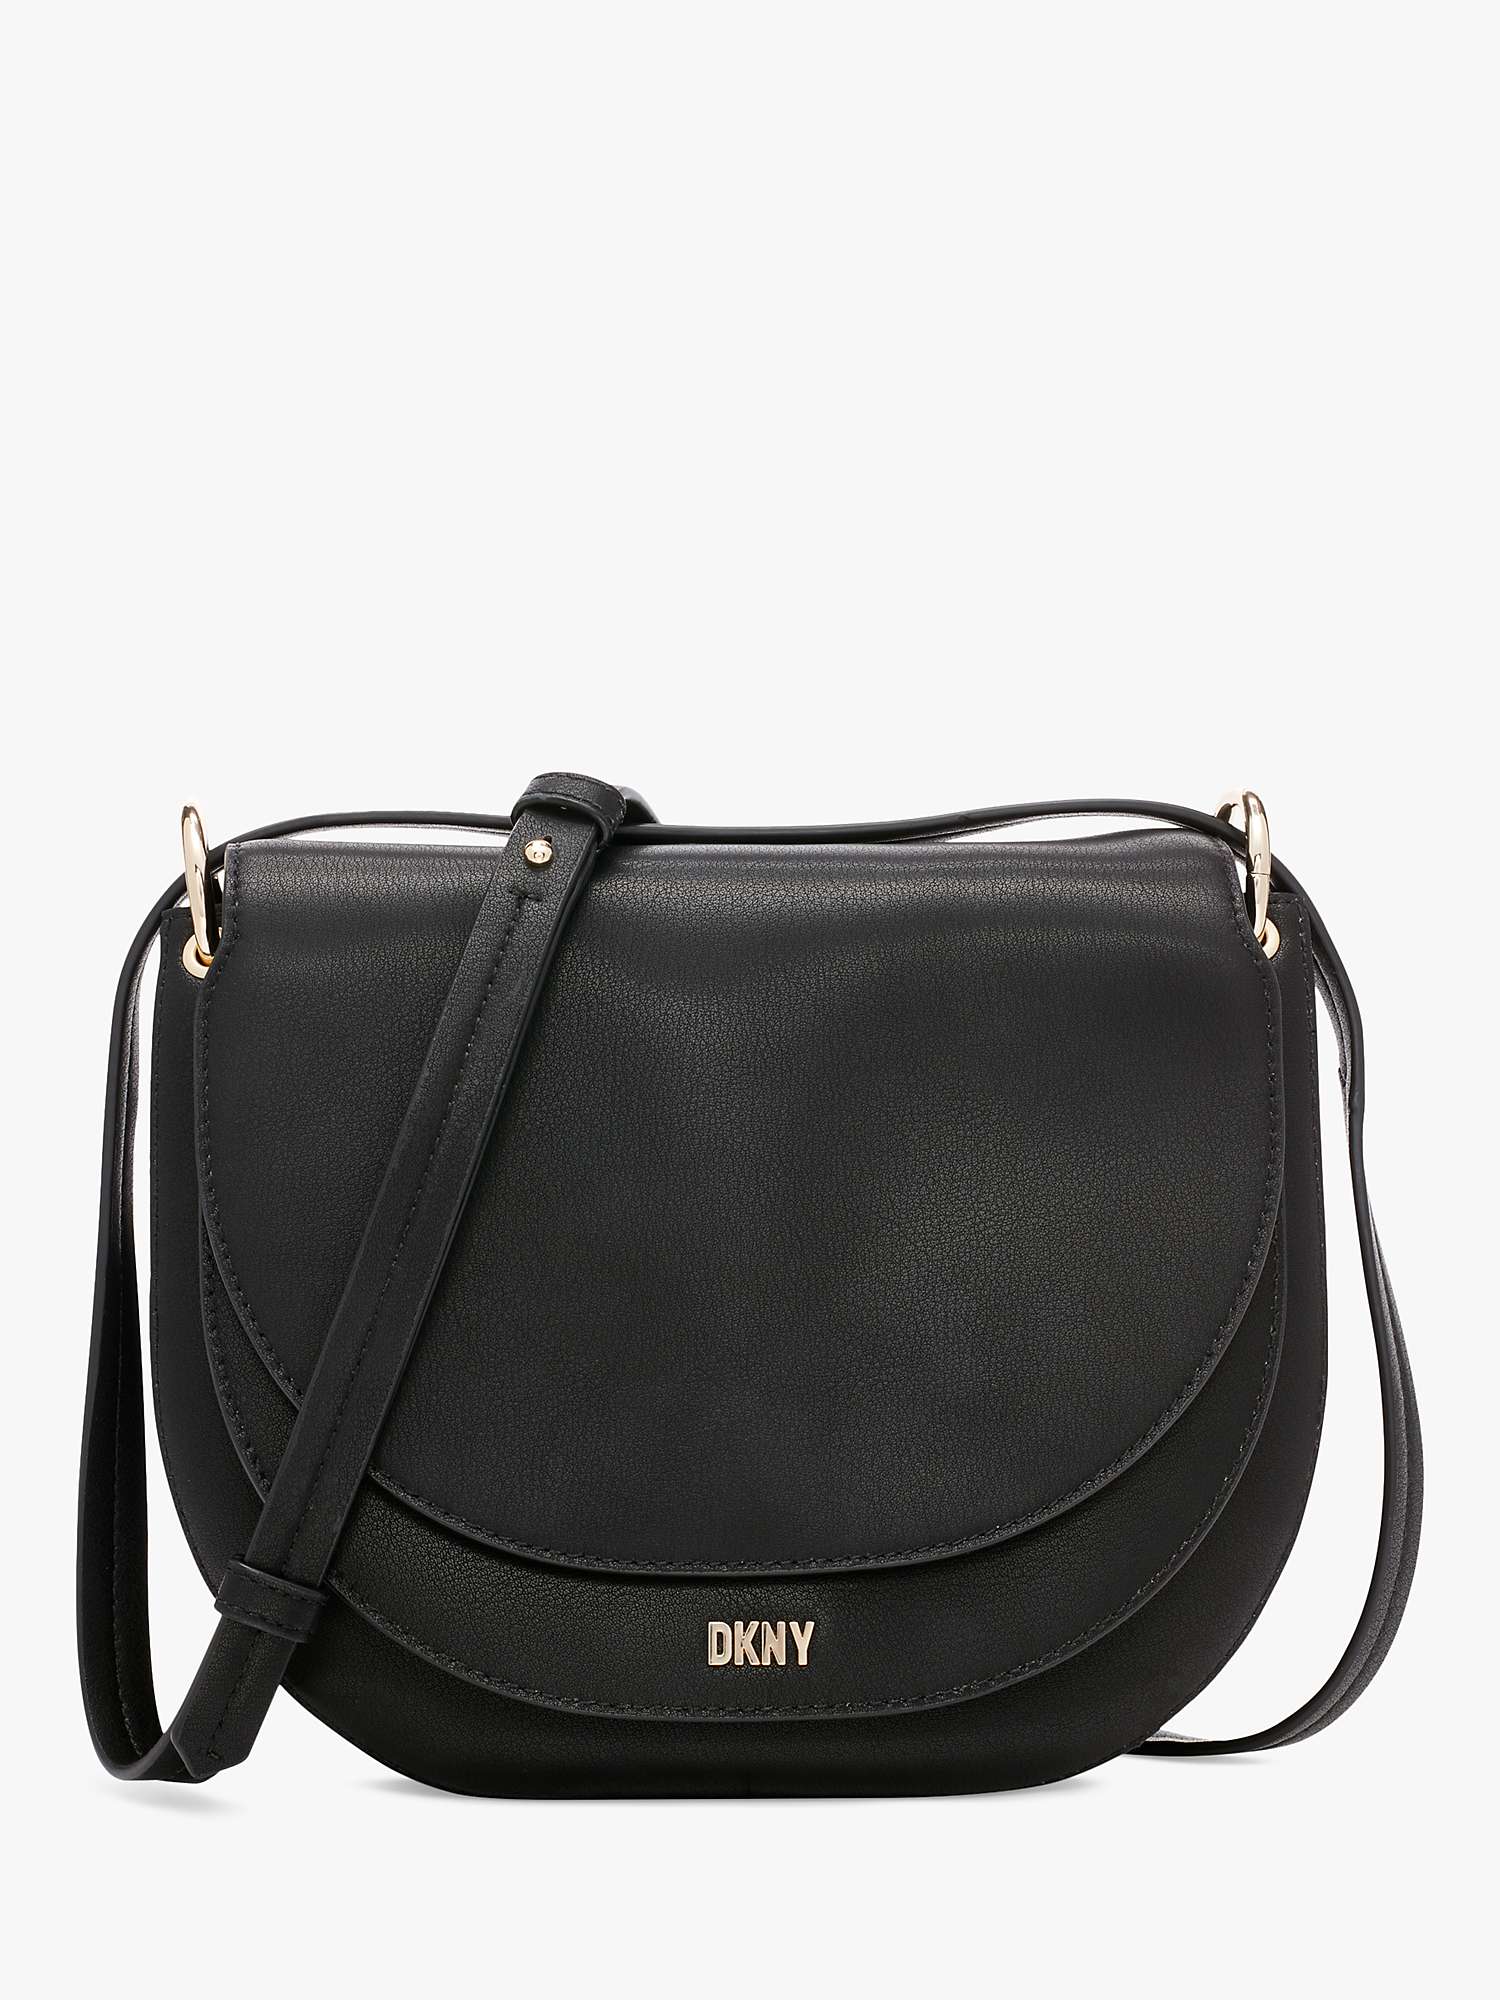 Buy DKNY Gramercy Leather Cross Body Bag Online at johnlewis.com